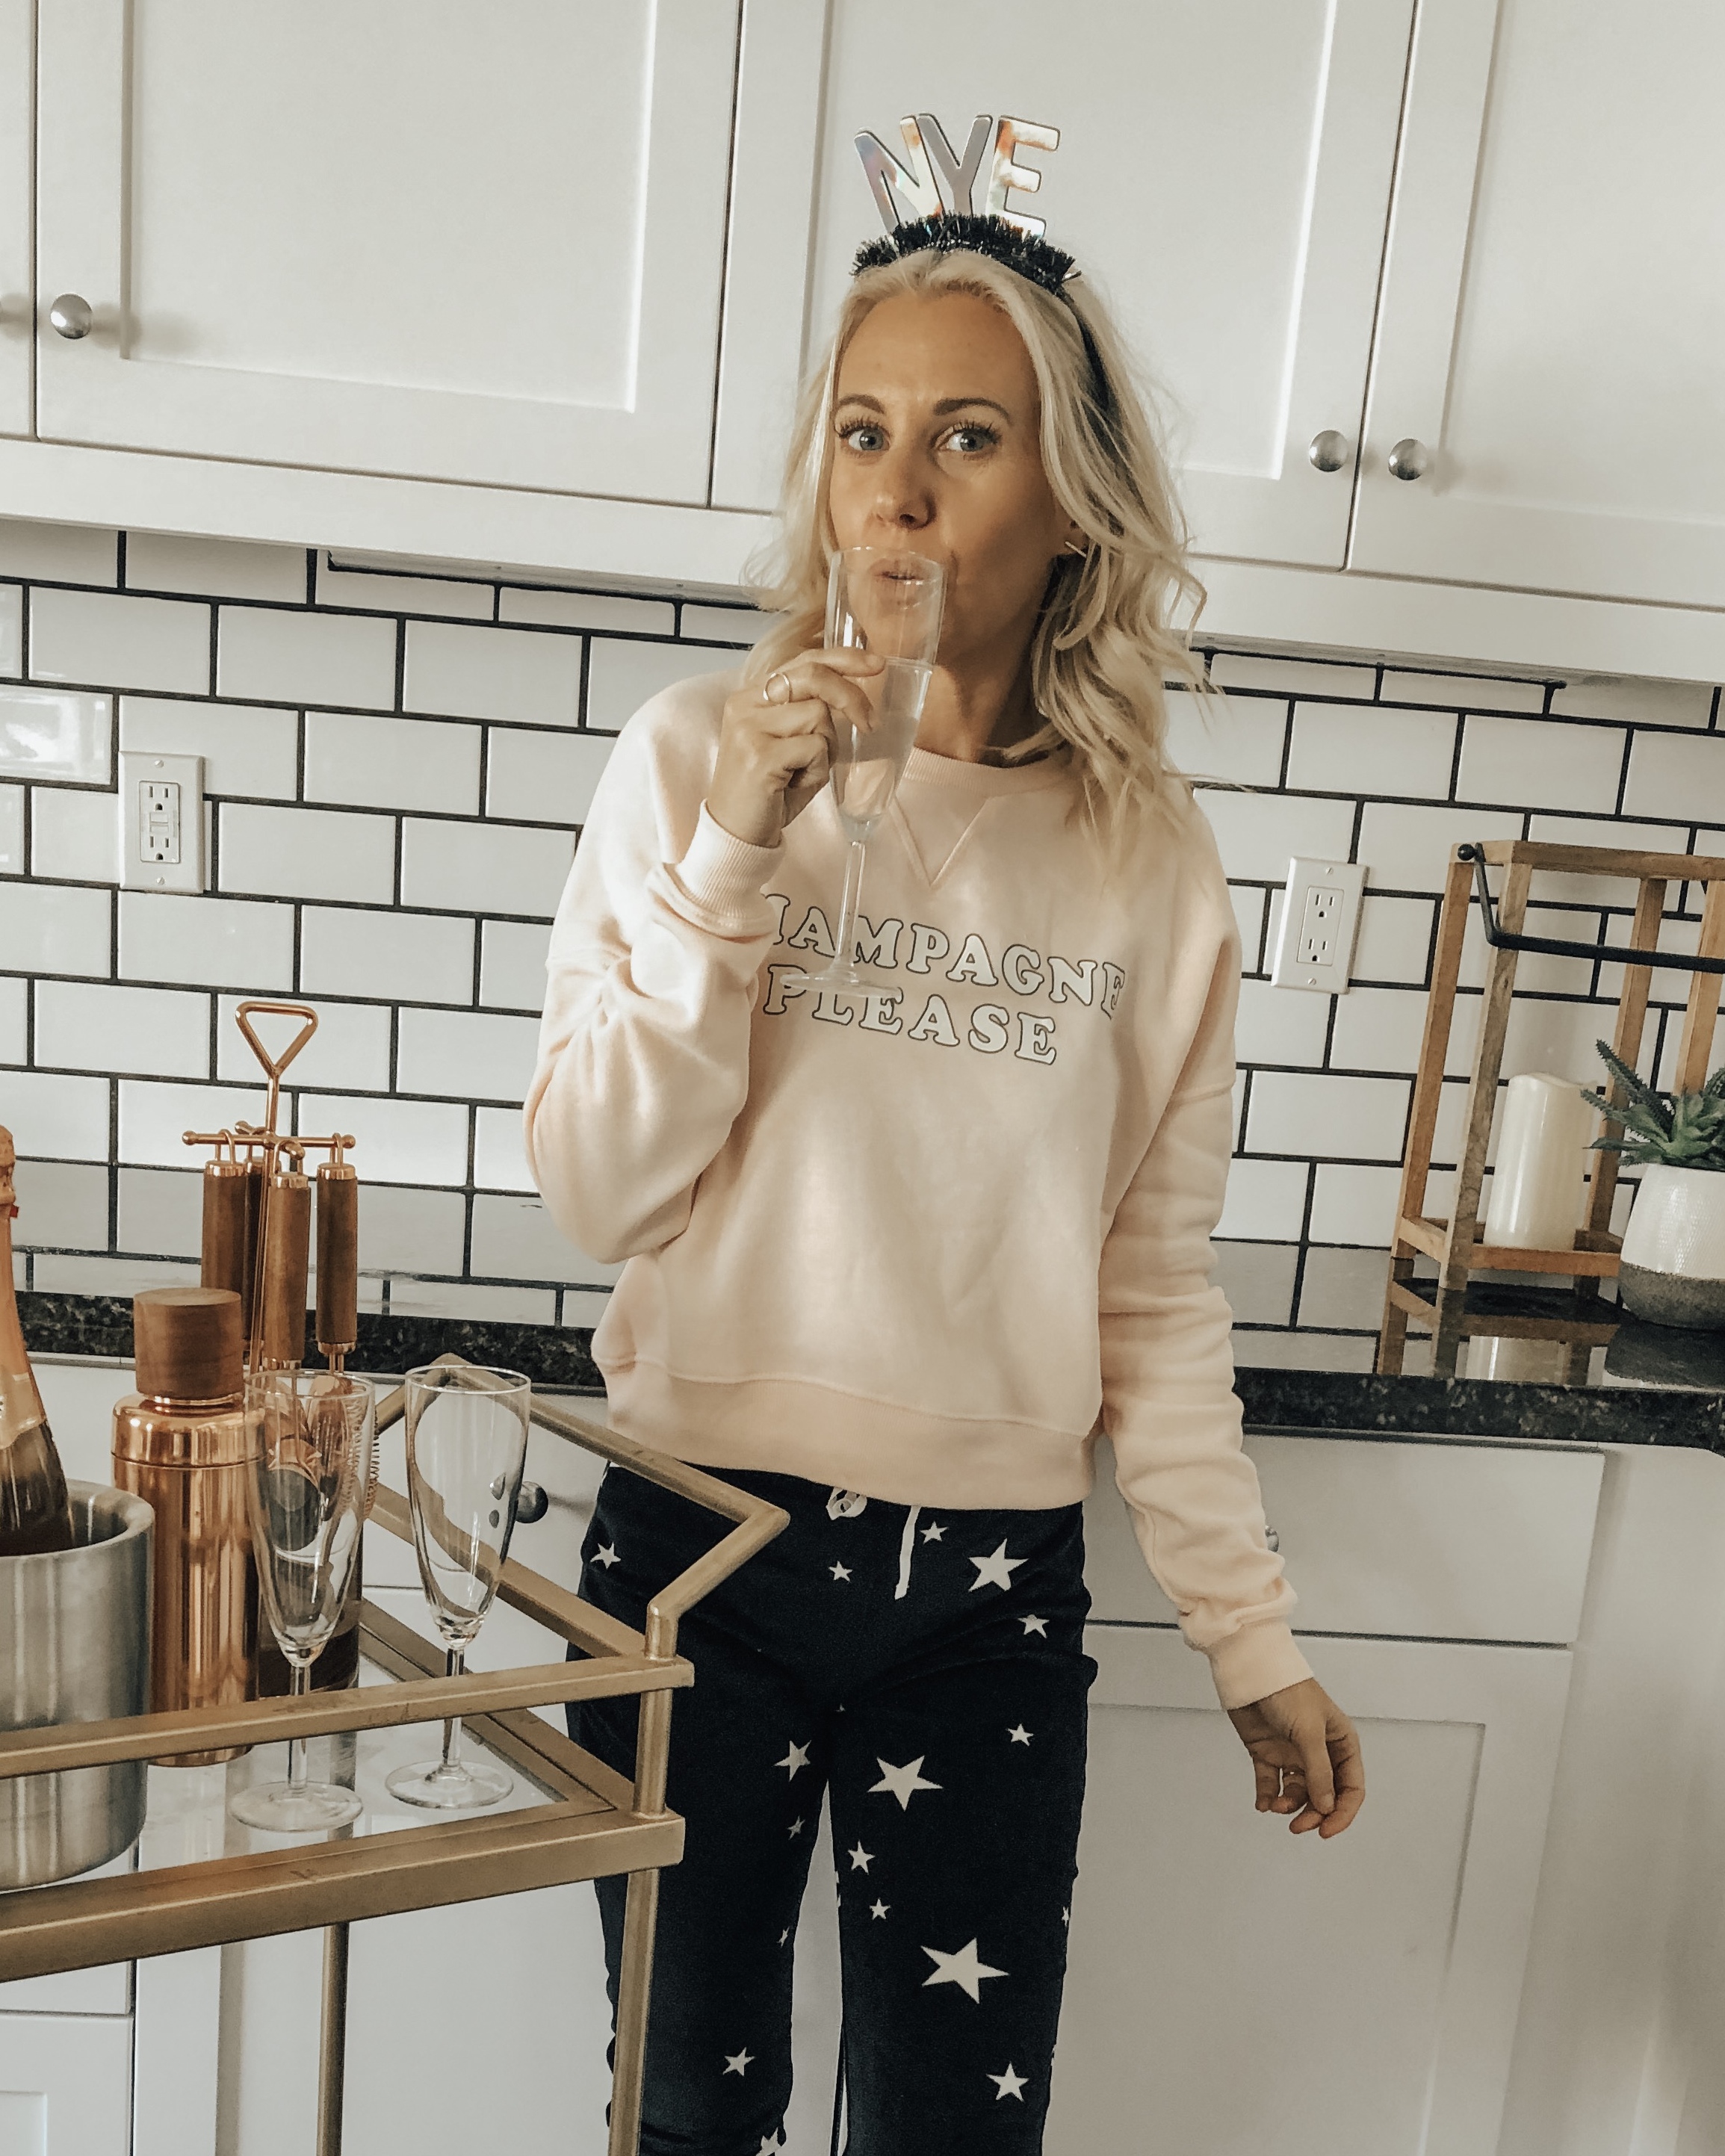 A COZY & CASUAL NYE- Jaclyn De Leon Style + New Years 2019 + casual sweatshirt + star print jogger pants + champagne please + target style + bar cart + party supplies + cozy home + party planning + lounging at home + countdown to New Years